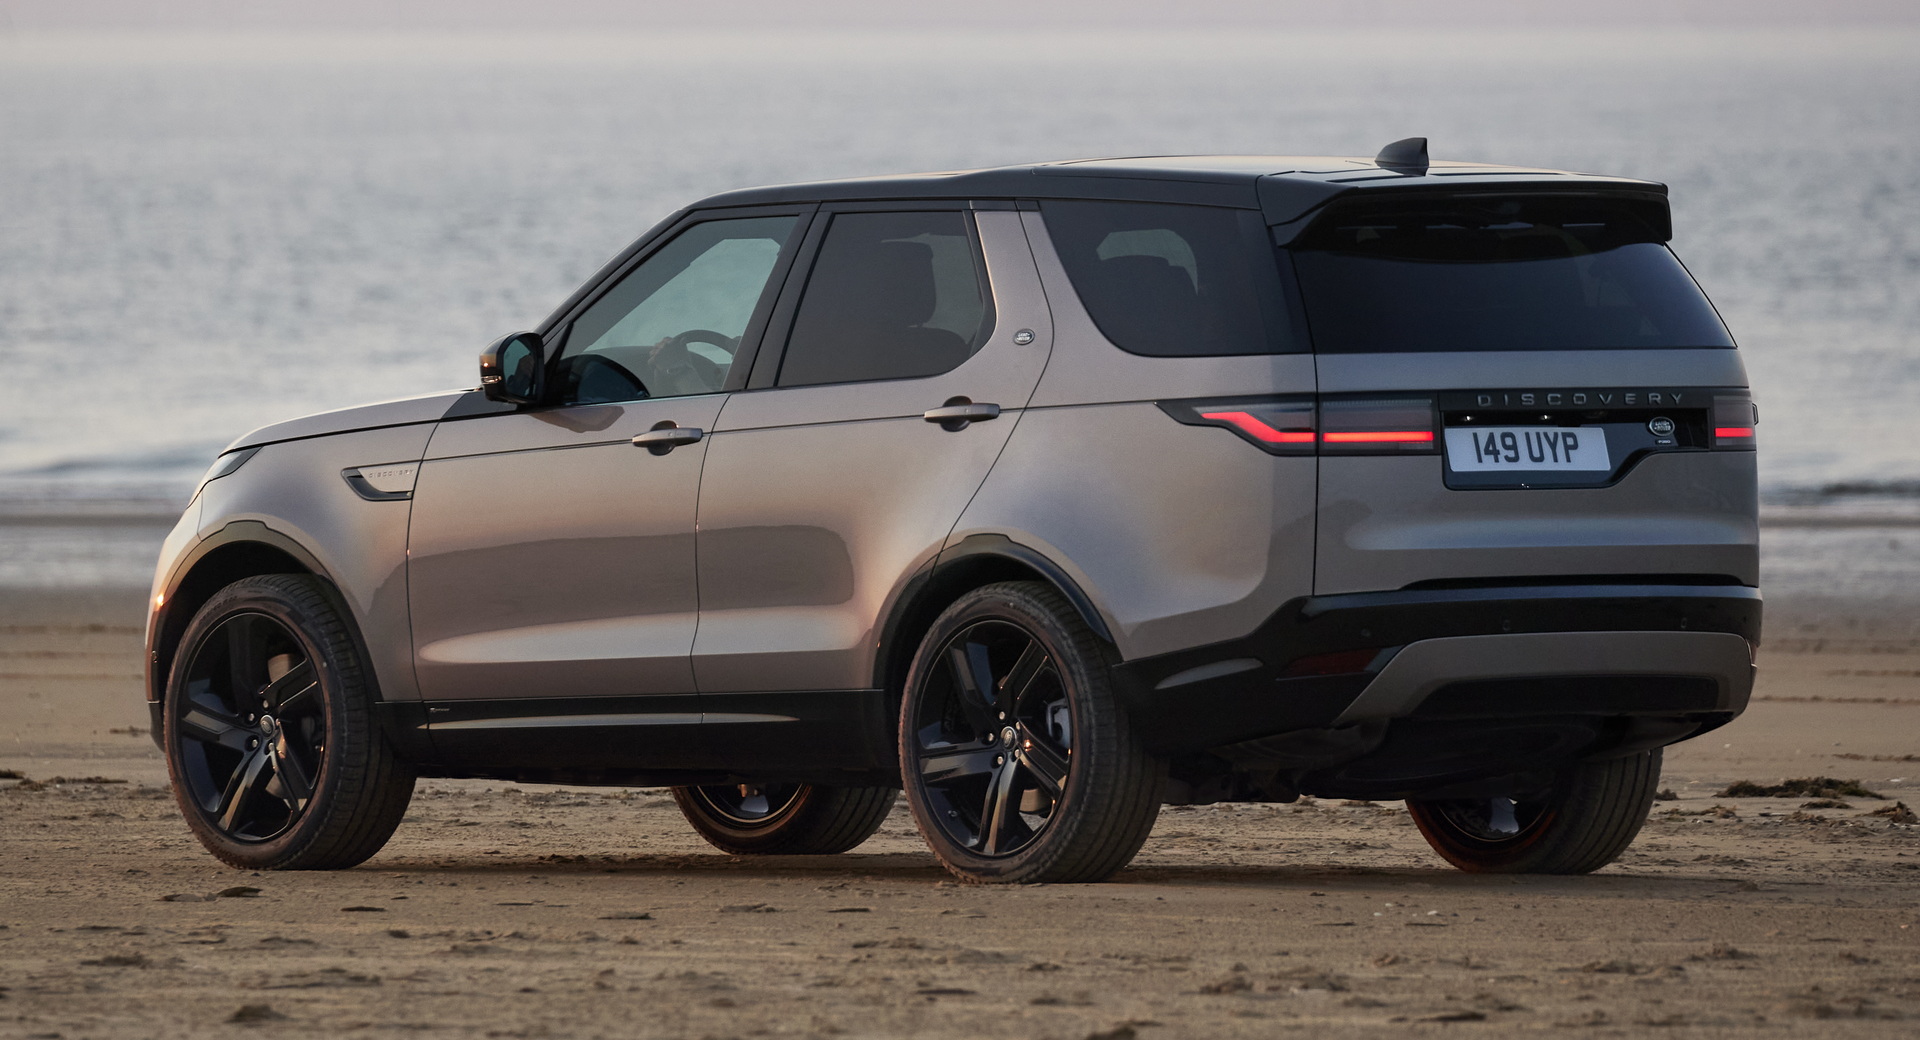 https://www.carscoops.com/wp-content/uploads/2021/03/2021-Land-Rover-Discovery-Sport-2.jpg